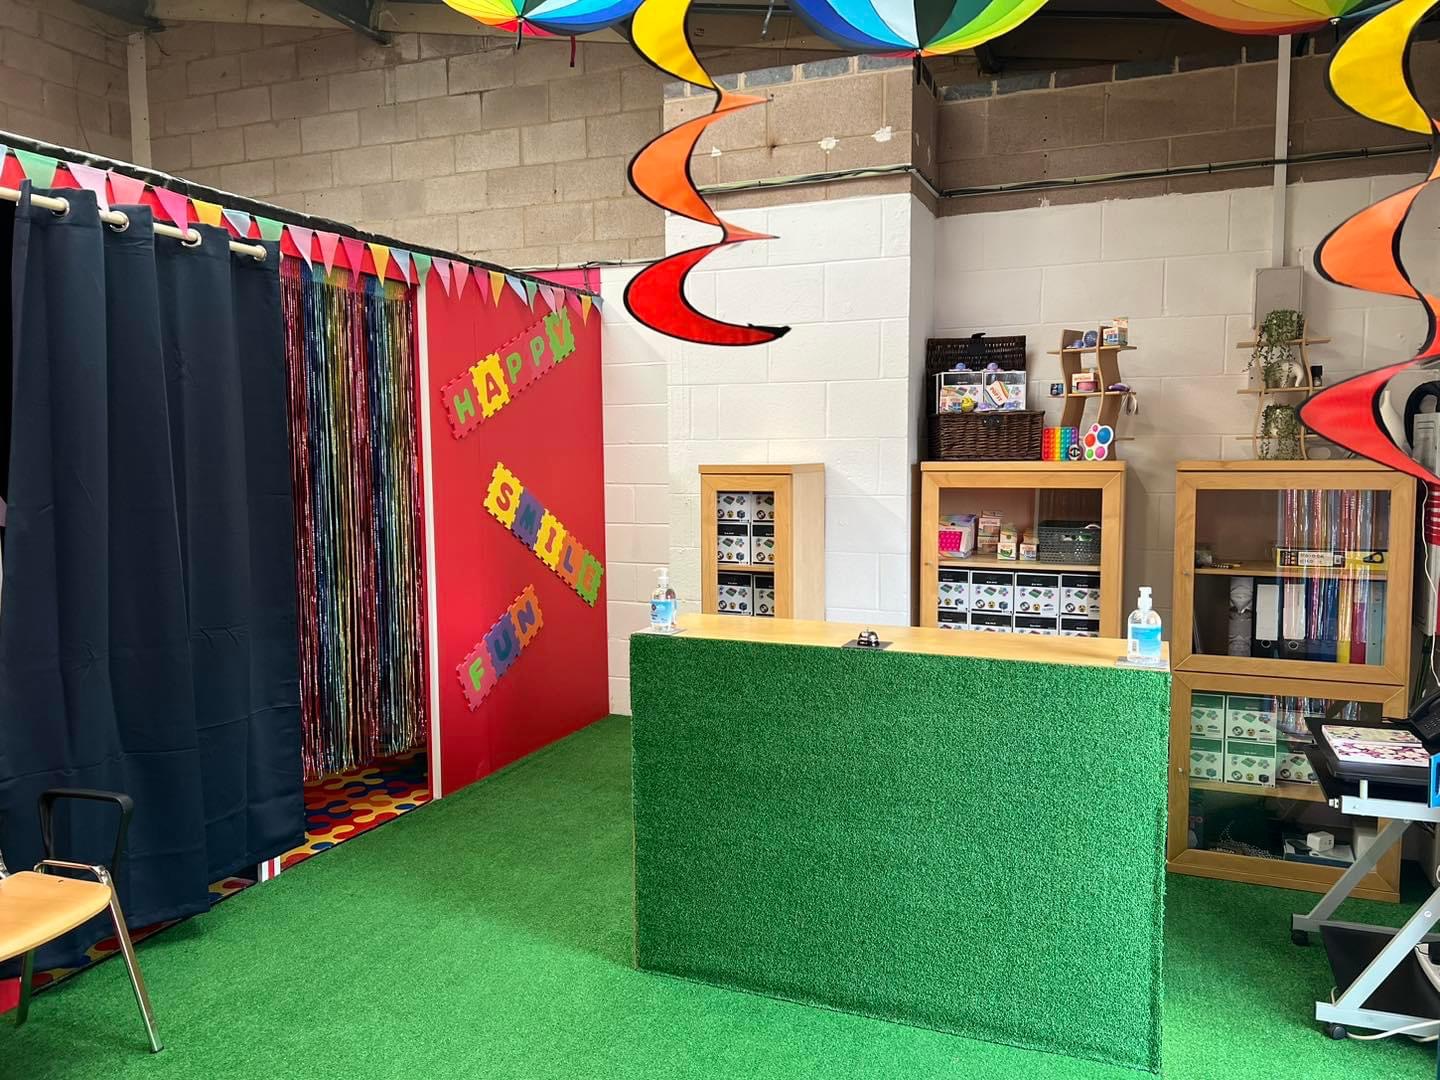 NEWS | A specialist sensory room has opened in Hereford with a messy play room, a light room and much more!